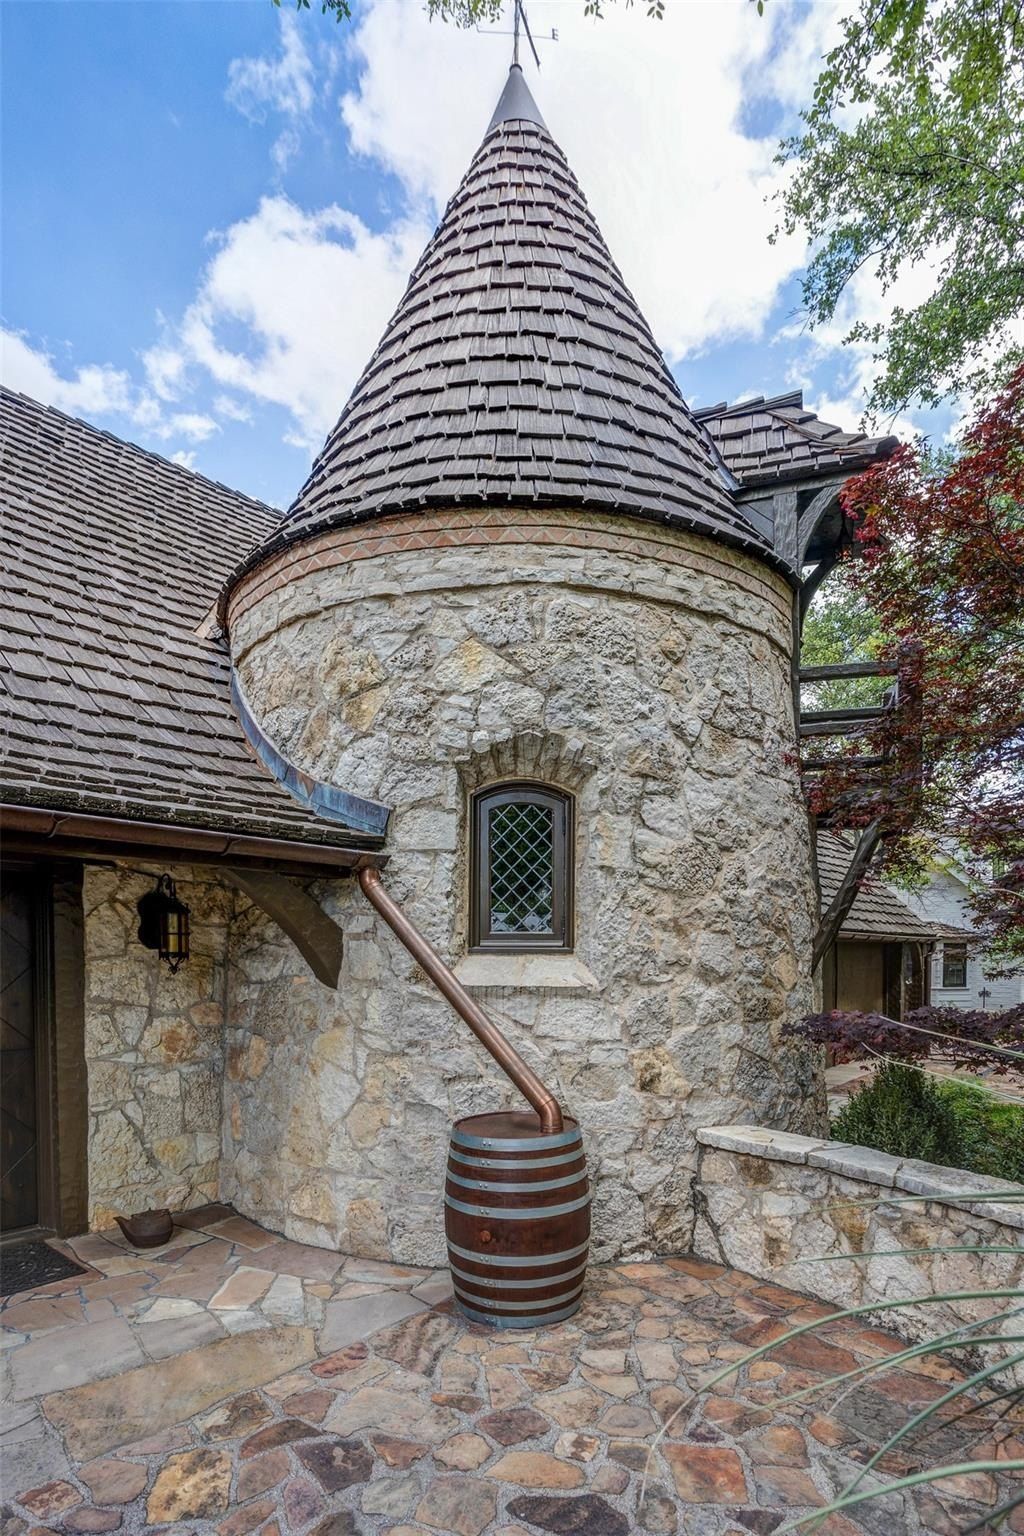 A 1937 english cottage in fort worth texas embracing exquisite craftsmanship and luxury finishes offered at 3. 985 million 6